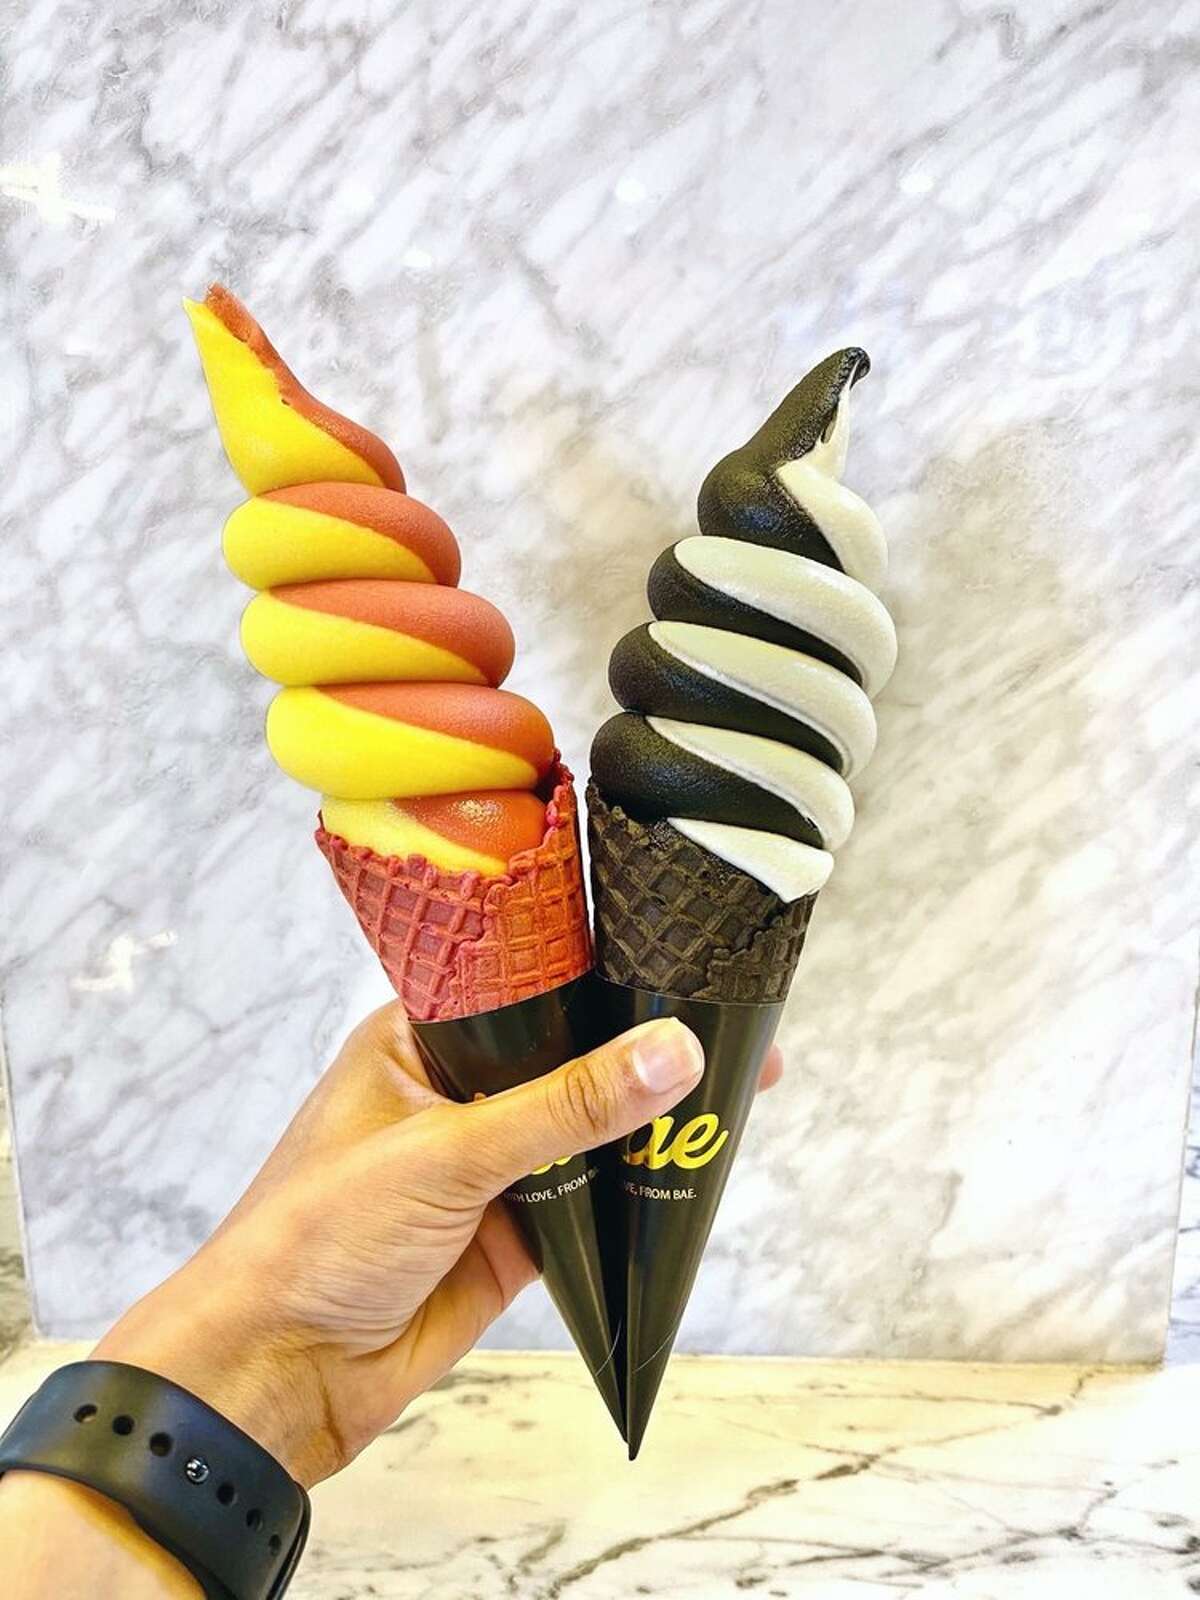 Two-color swirl soft serve is all the rage at ice cream shops like Bae.